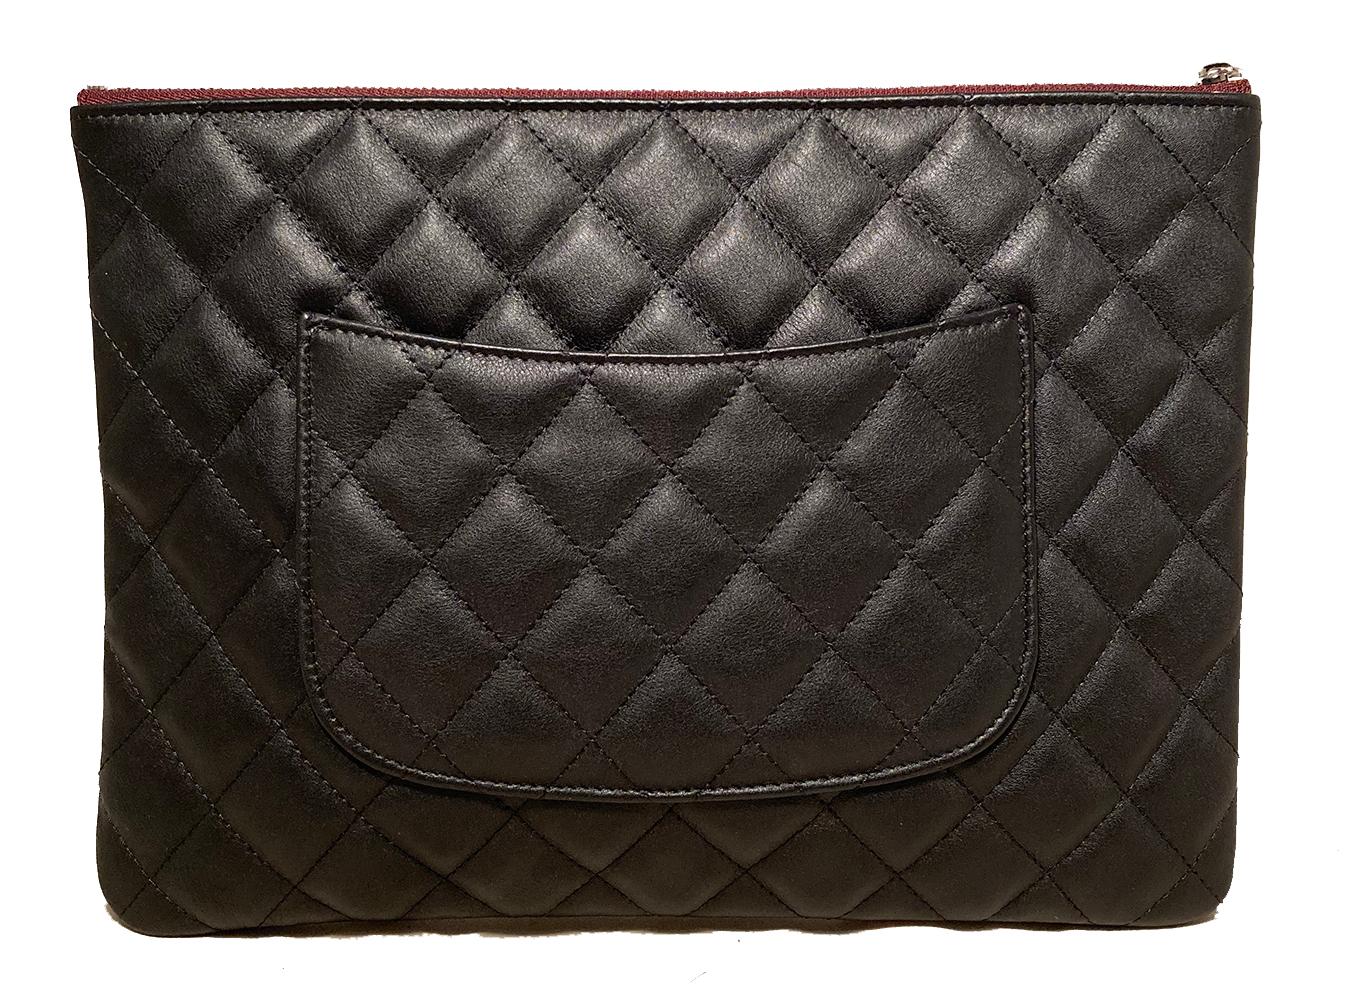 Chanel Black Quilted Leather Medium O Pouch in Like New unused condition. Black diamond quilted calfskin leather exterior with tiny silver CC logo emblem along front and back side slit pocket. Top Maroon leather zip pull opens to a maroon nylon